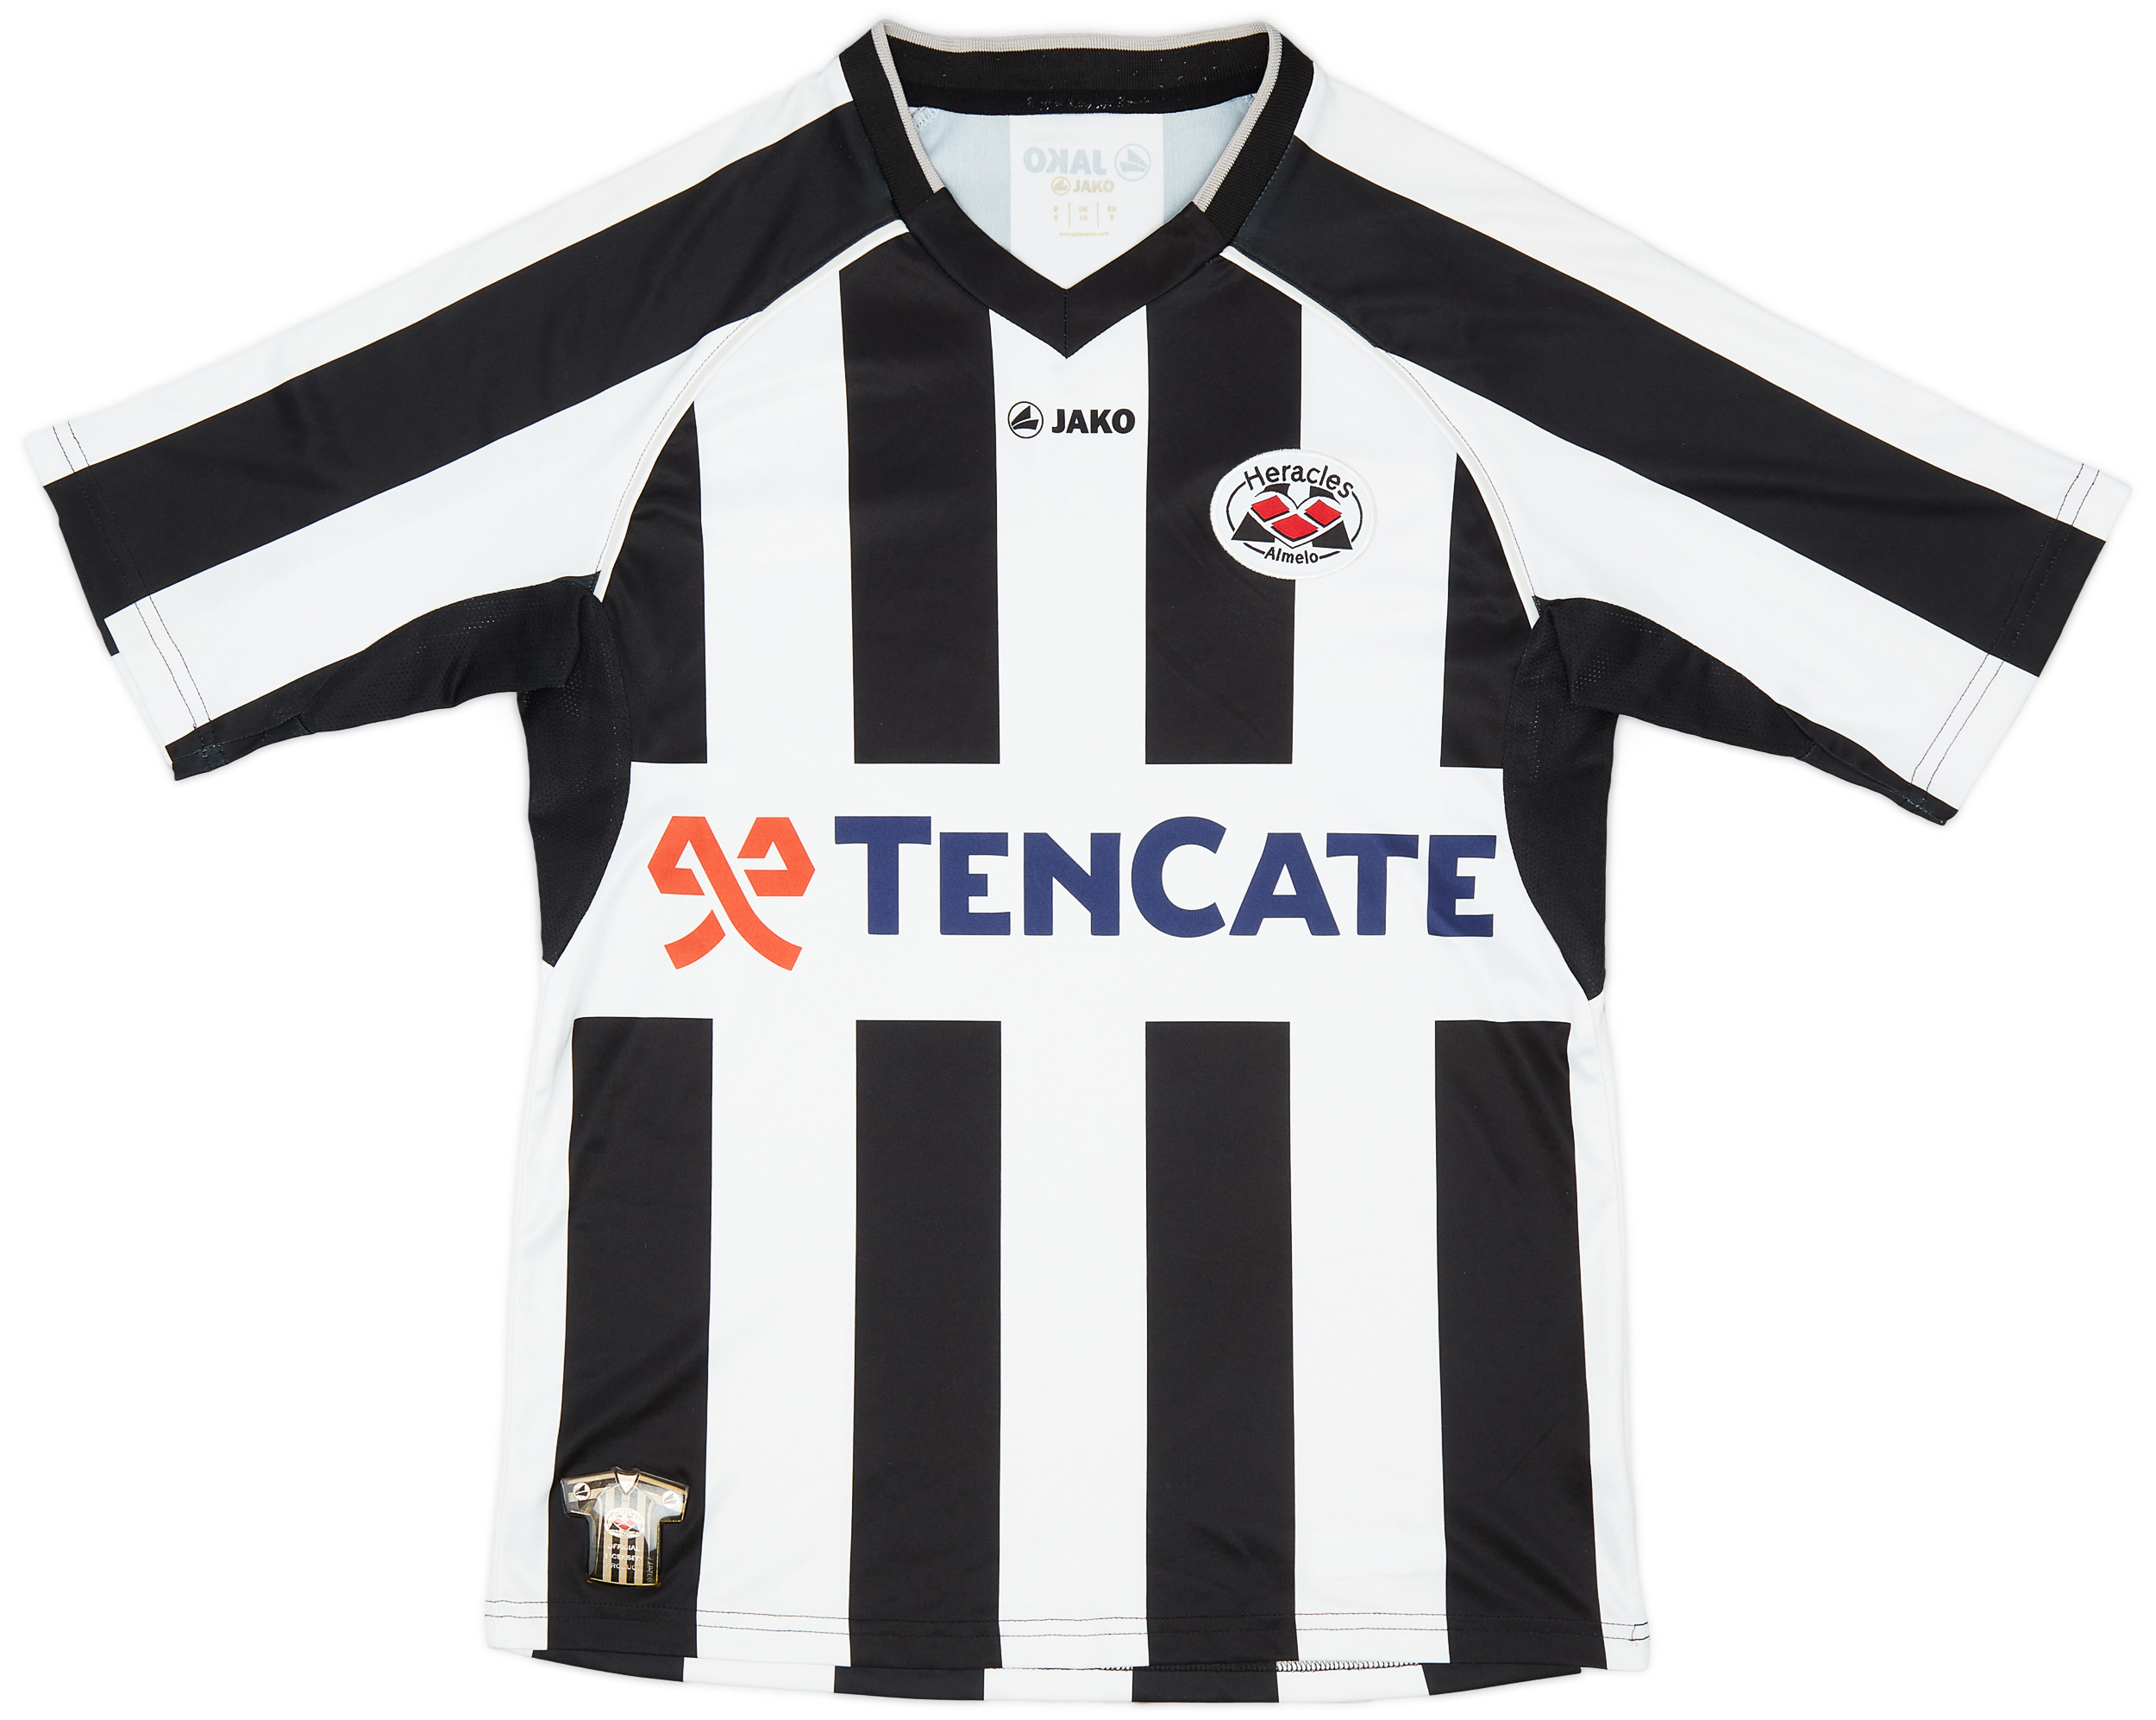 2011-12 Heracles Almelo Home Shirt - 9/10 - ()